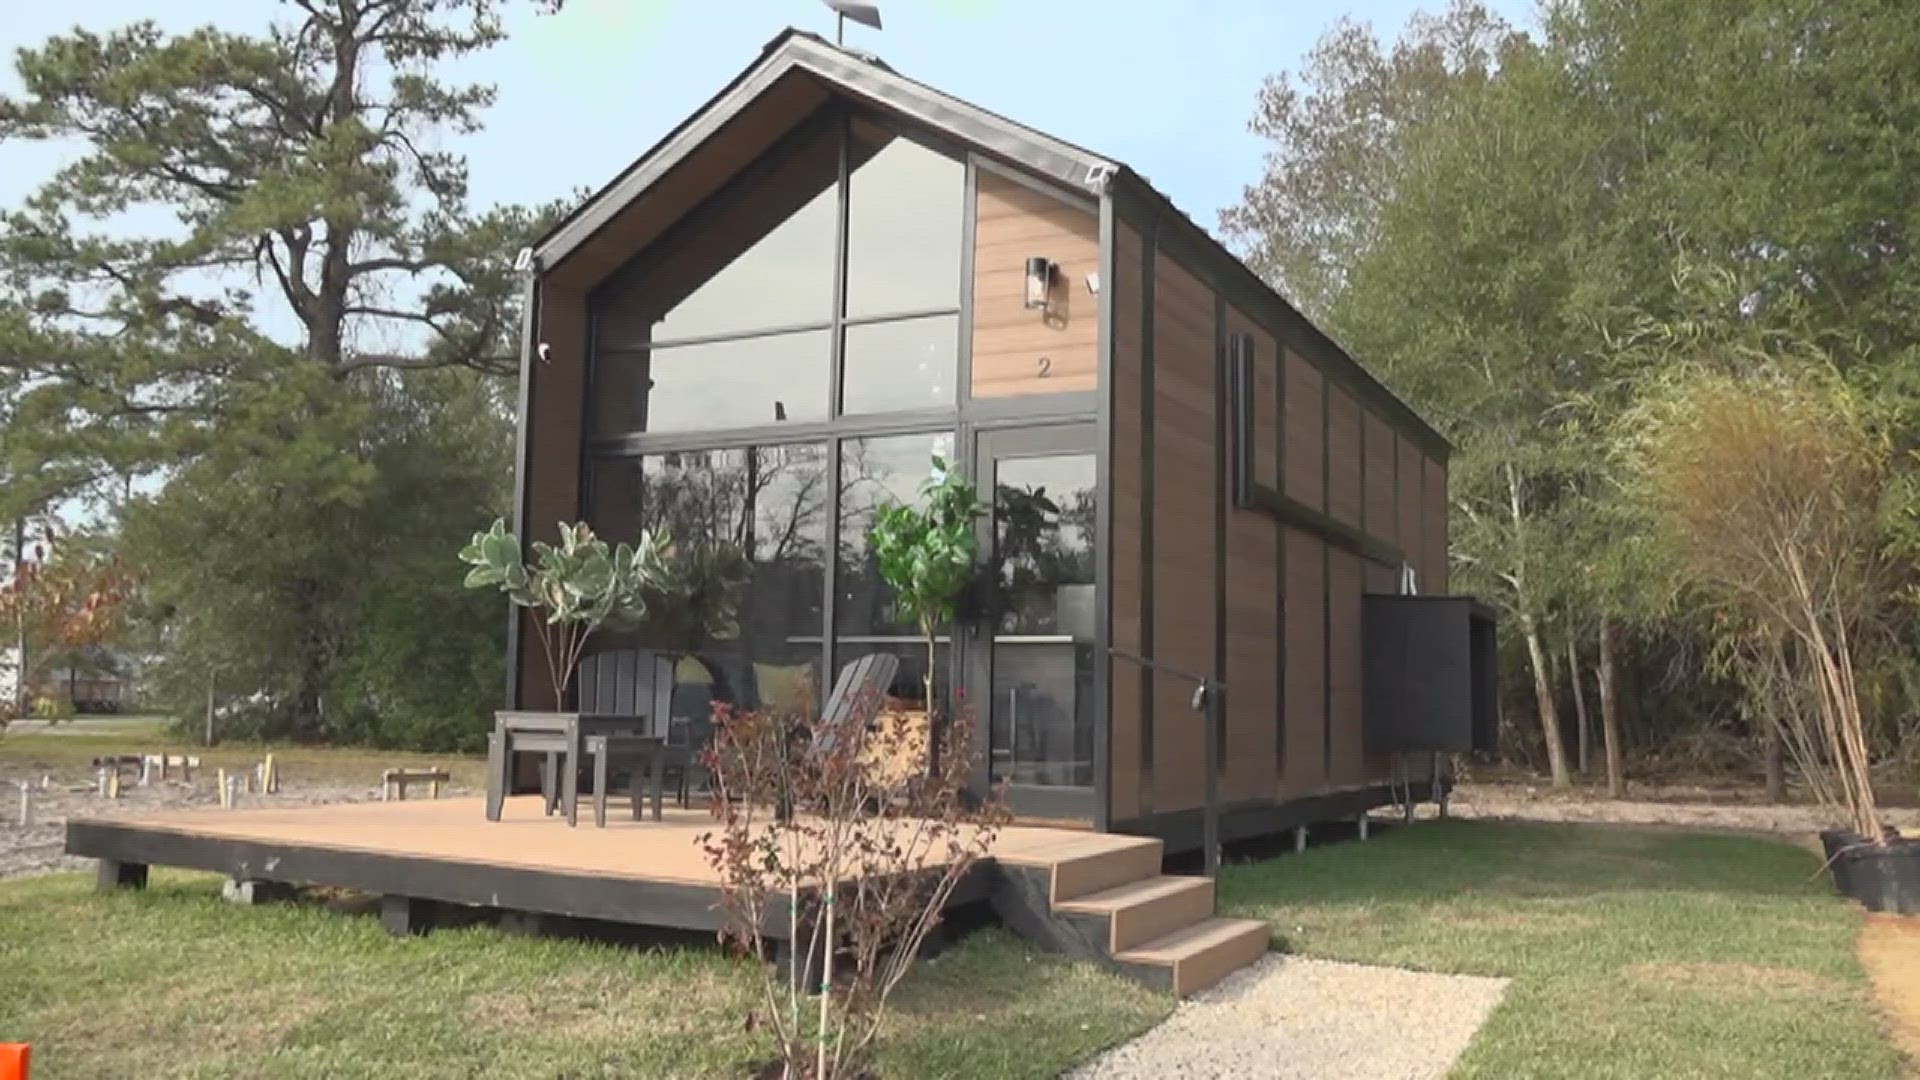 For those looking to downsize and simplify, Houston developers are building a tiny home village in Pinehurst.